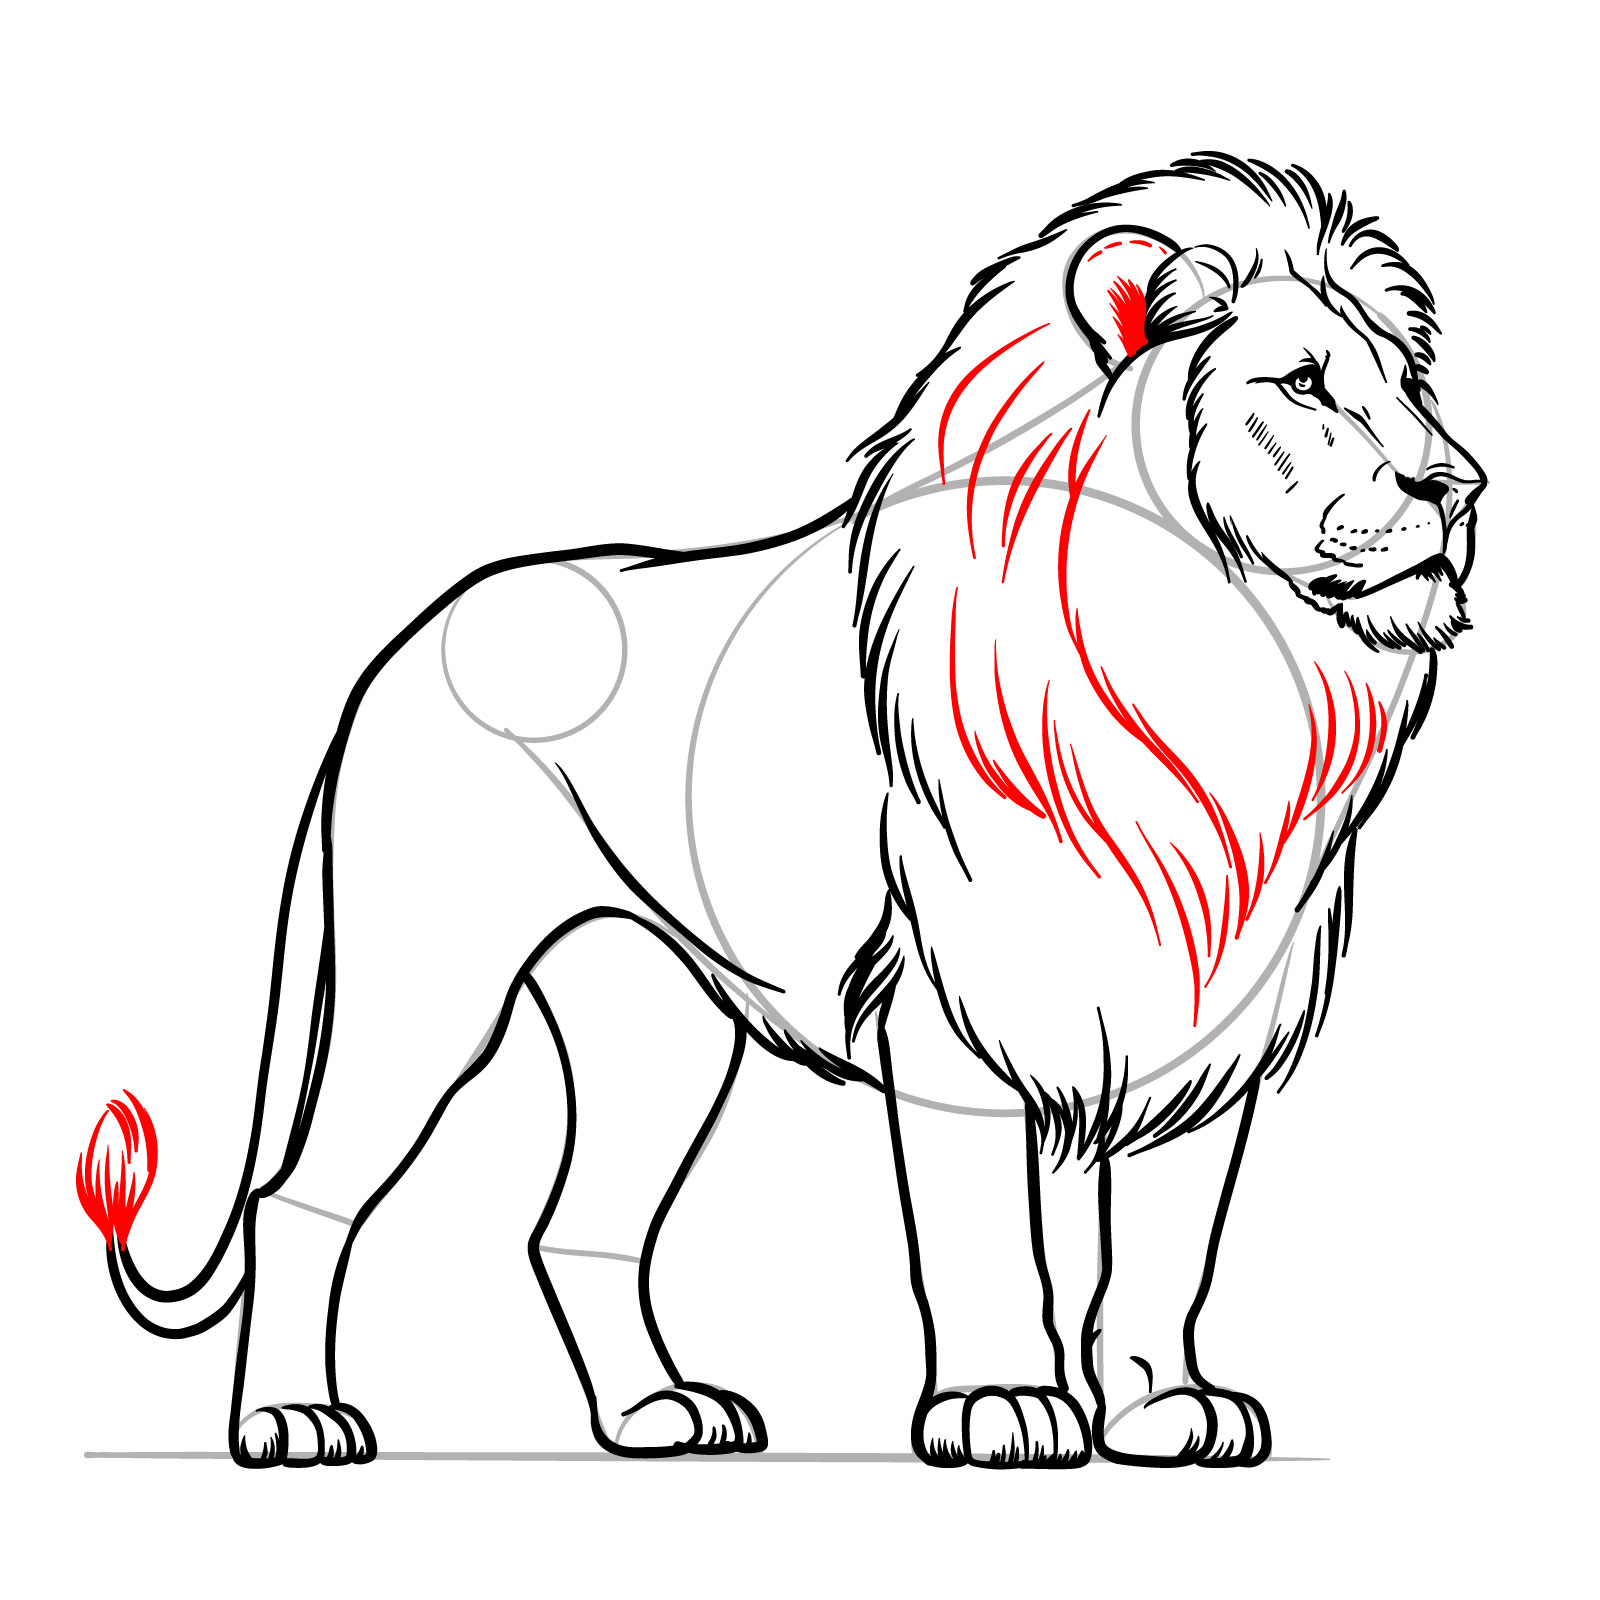 Detailing the mane and tail in a standing lion illustration - step 13